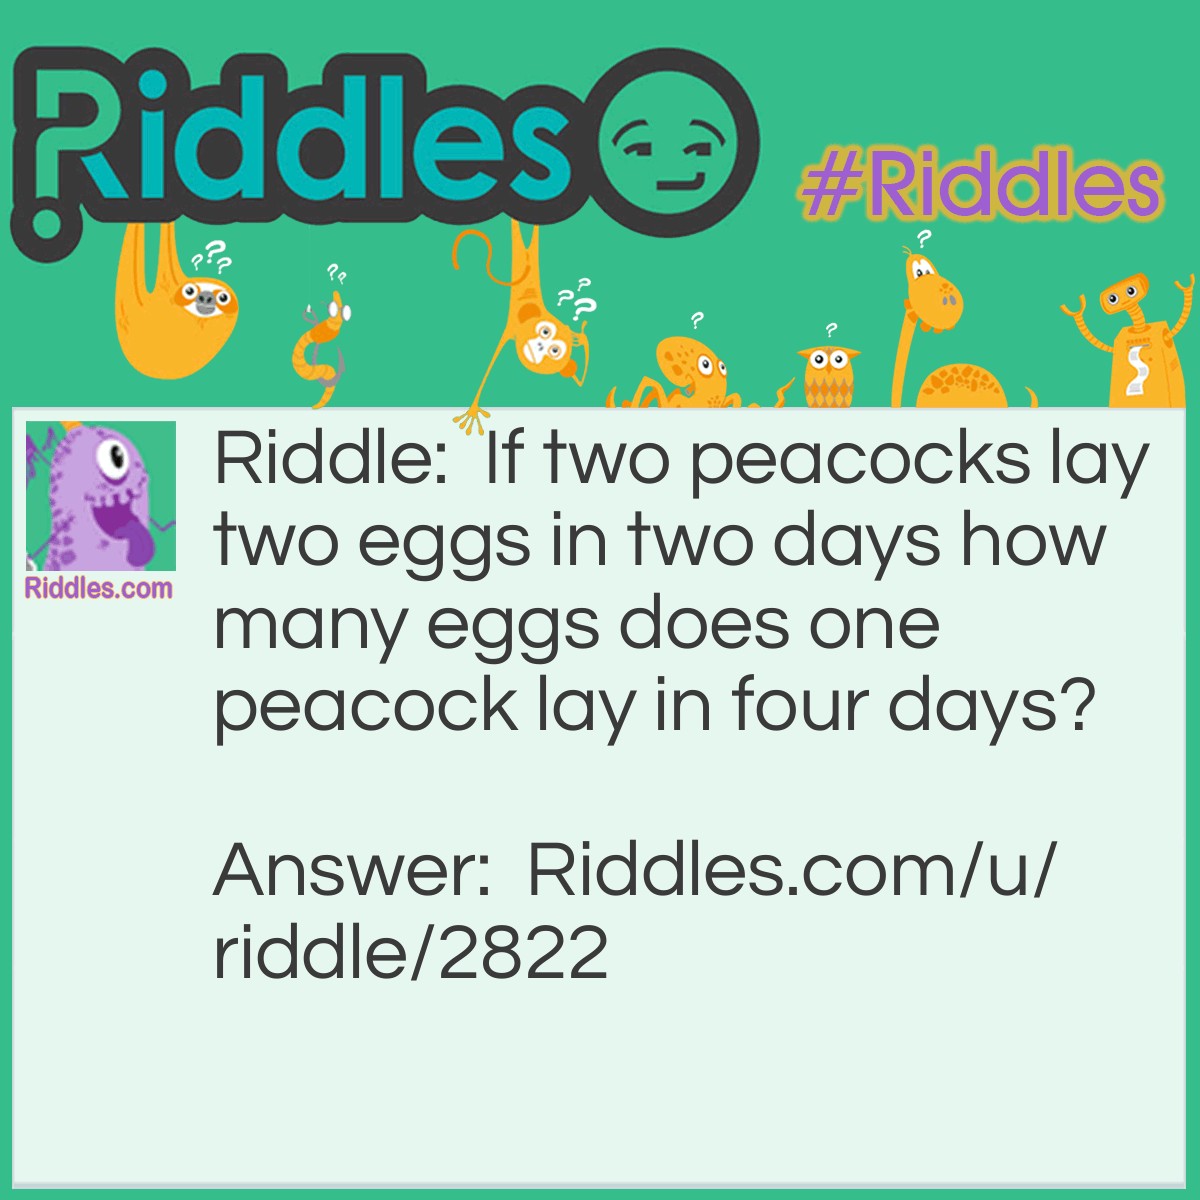 Riddle: If two peacocks lay two eggs in two days how many eggs does one peacock lay in four days? Answer: Peacocks don't lay eggs.